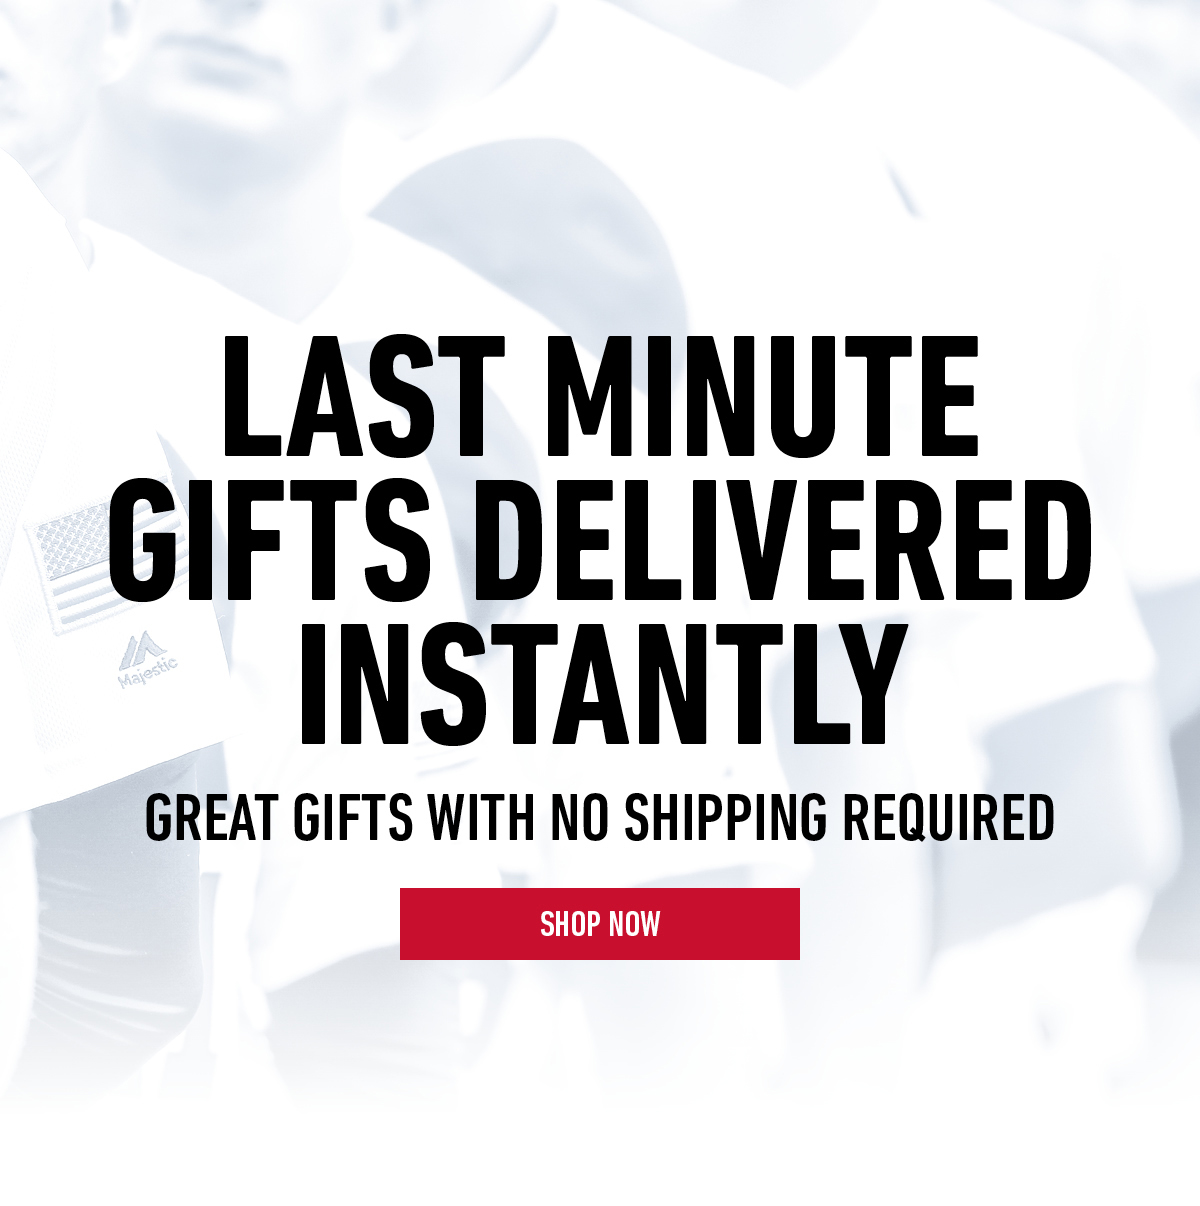 Last minute gifts delivered instantly